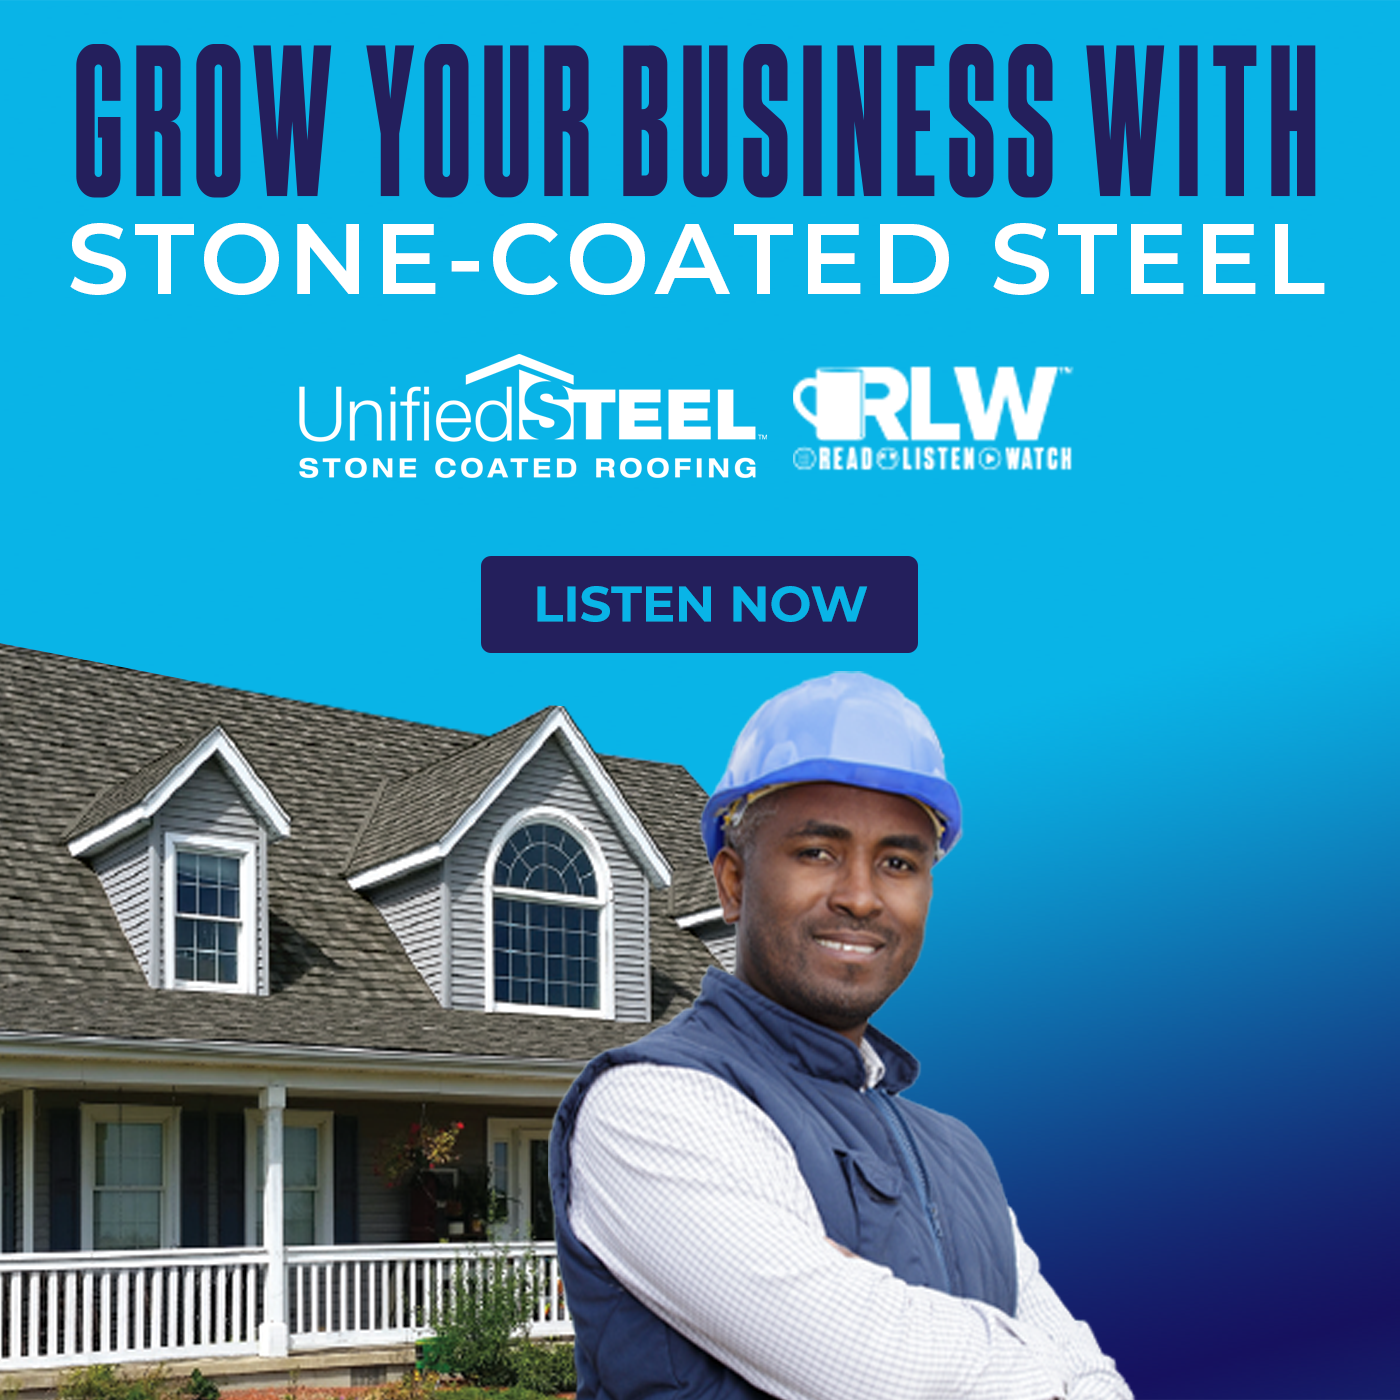 WestLake - Grow Your Business With Stone-coated Steel - RLW - POD